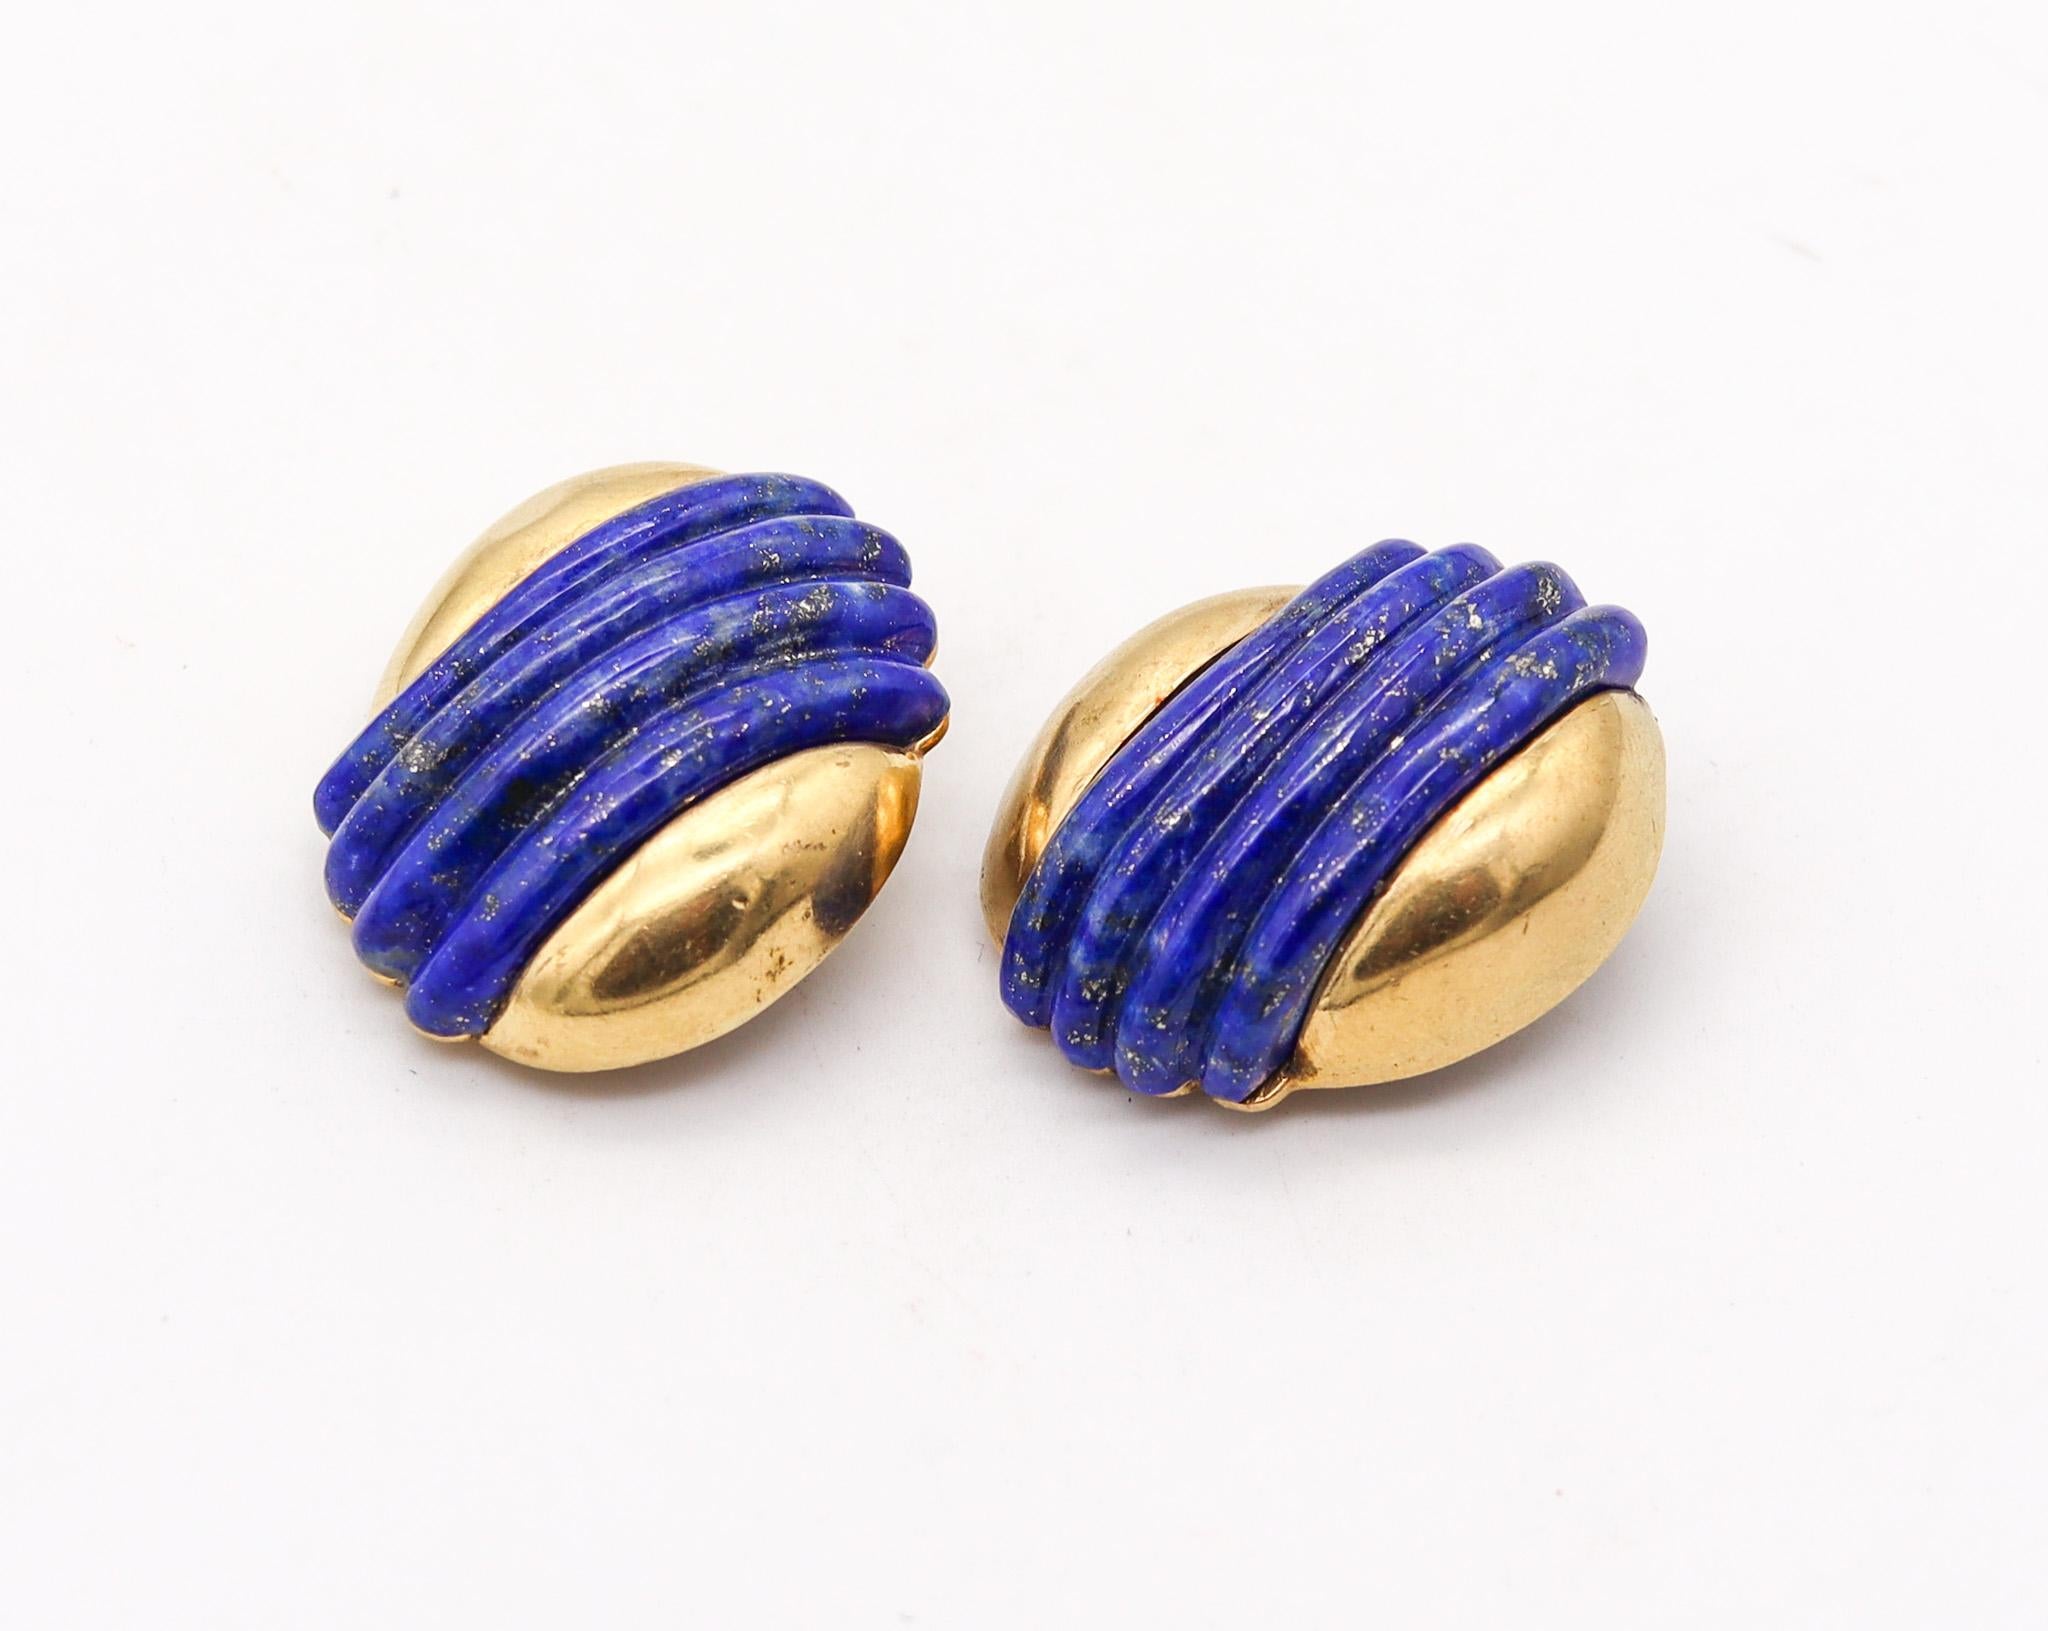 Clips-on earrings designed by Cartier.

Fabulous pair of earrings, created by the French jewelry house of Cartier, back in the 1970. Crafted in a bombe fluted shape in solid yellow gold of 18 karats with high polished finish. They are fitted with